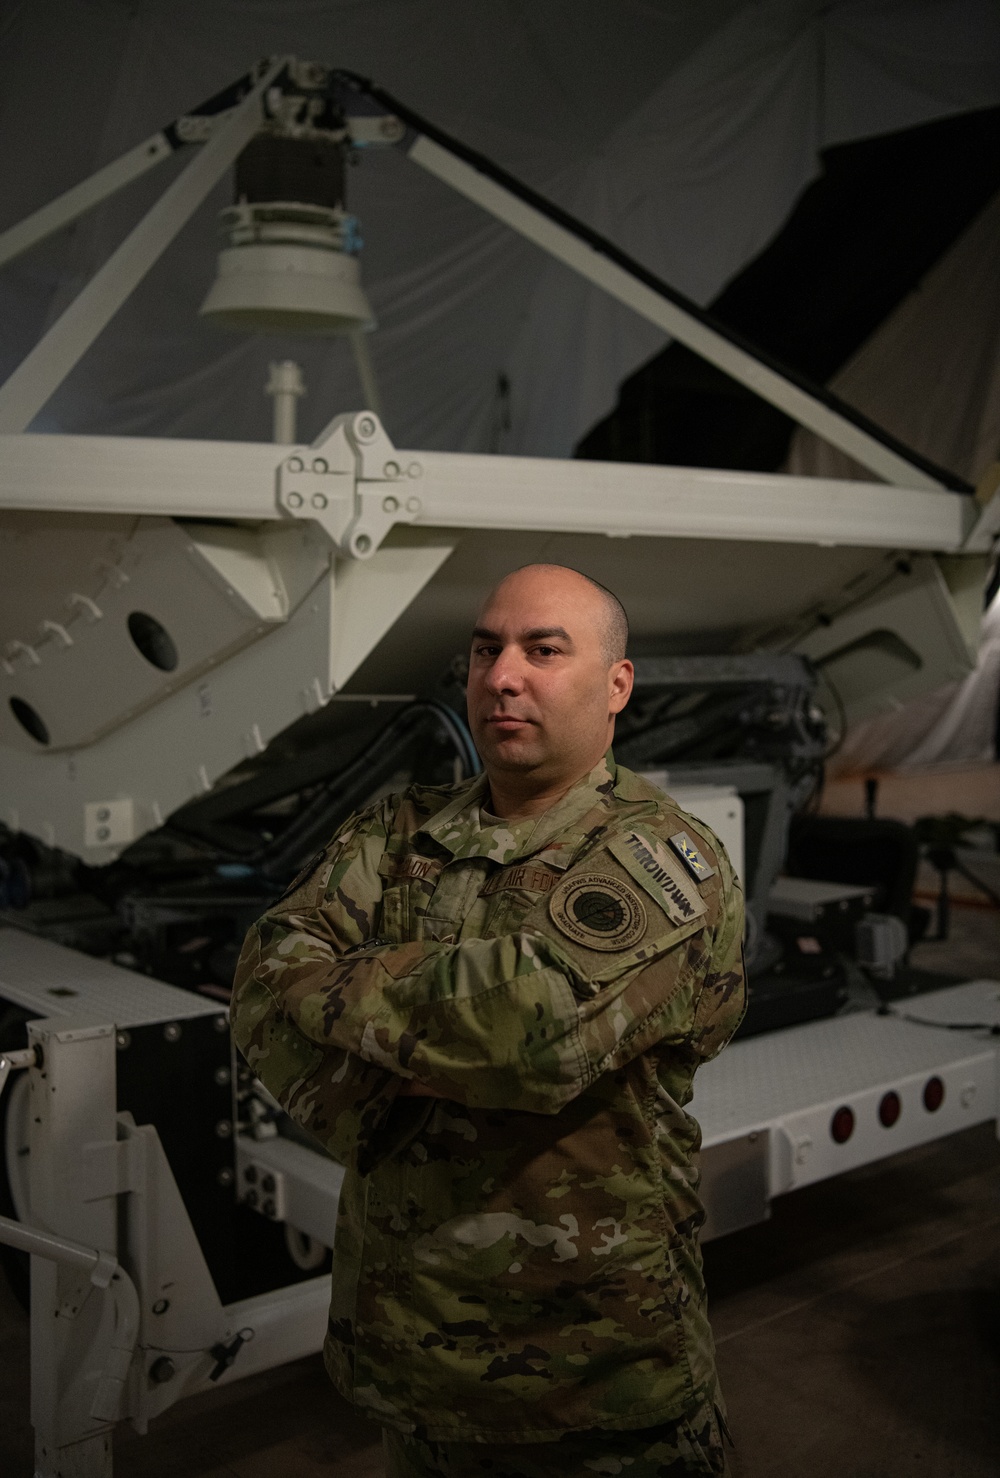 Air guardsman achieves first at Air Force Weapons School